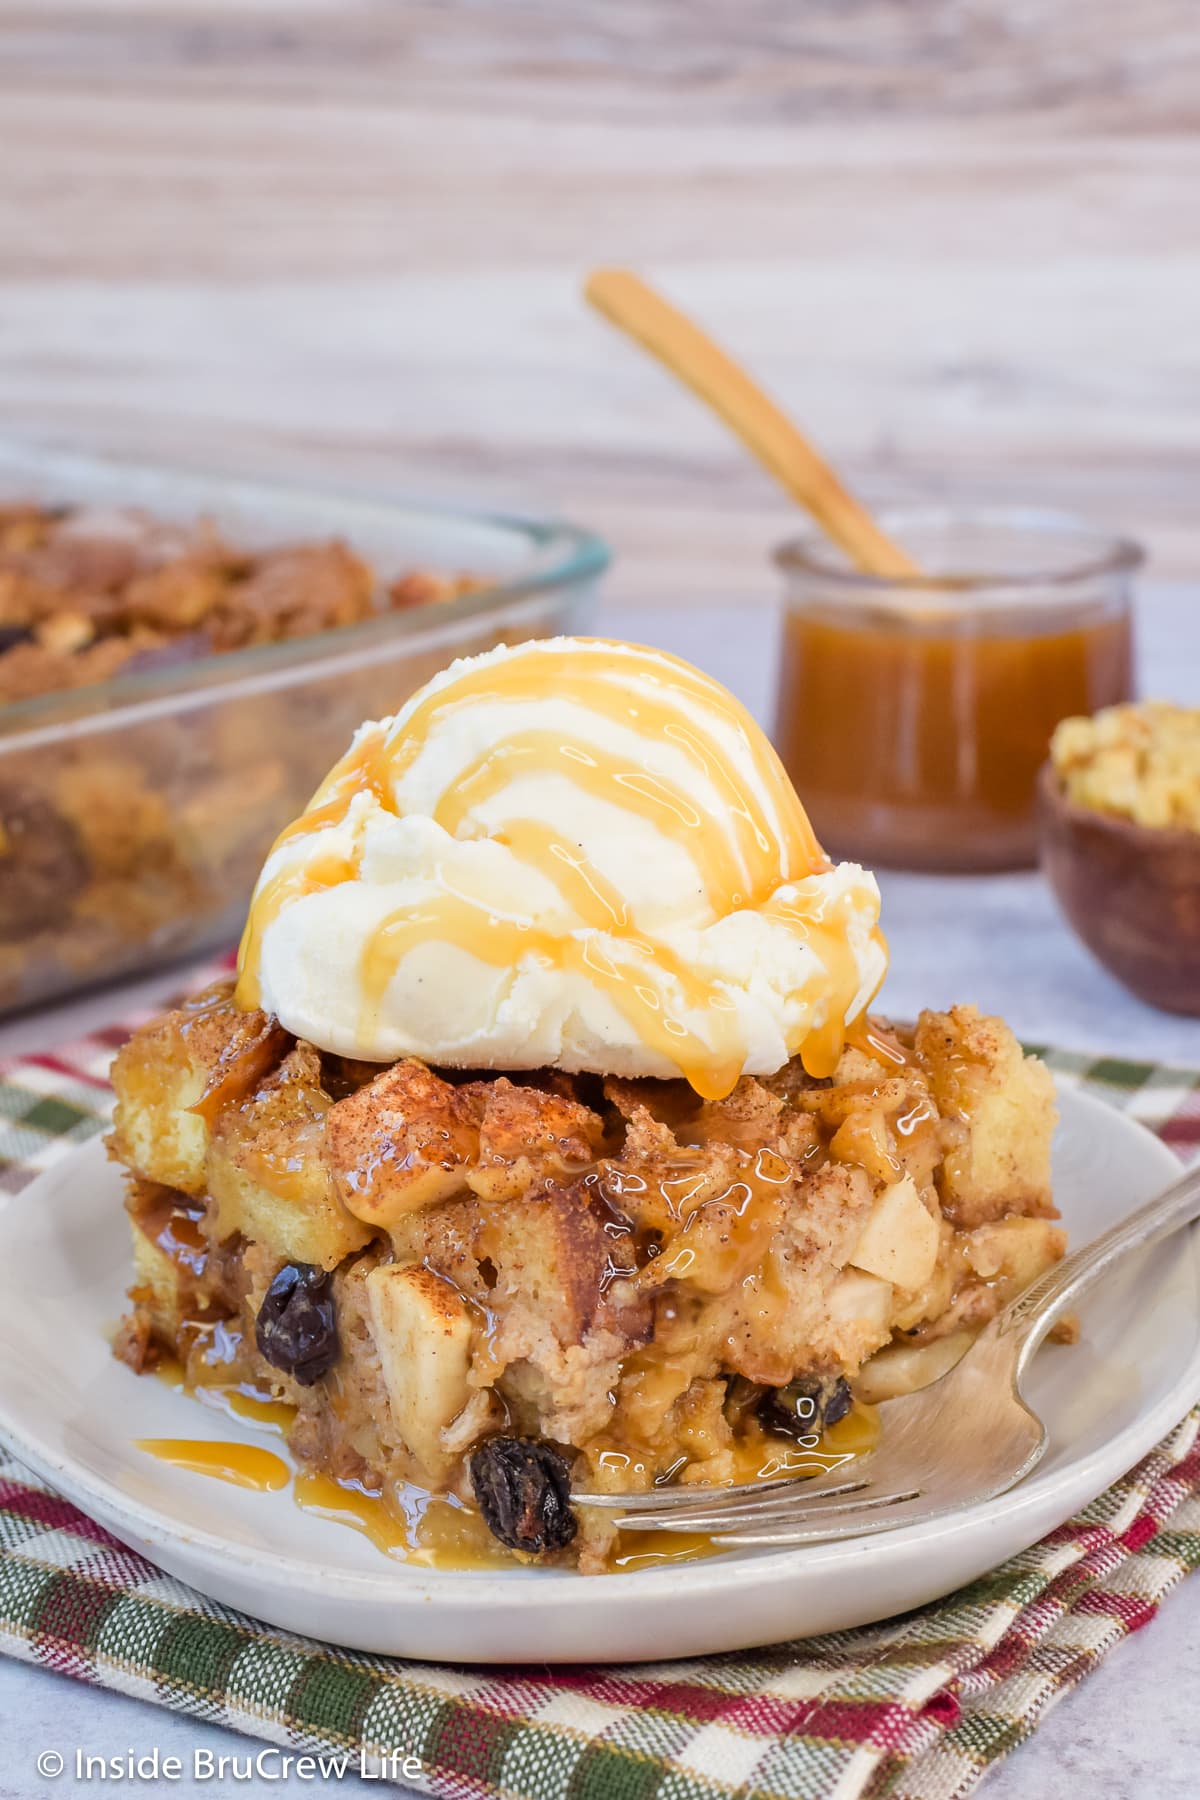 Apple bread casserole topped with ice cream and caramel.